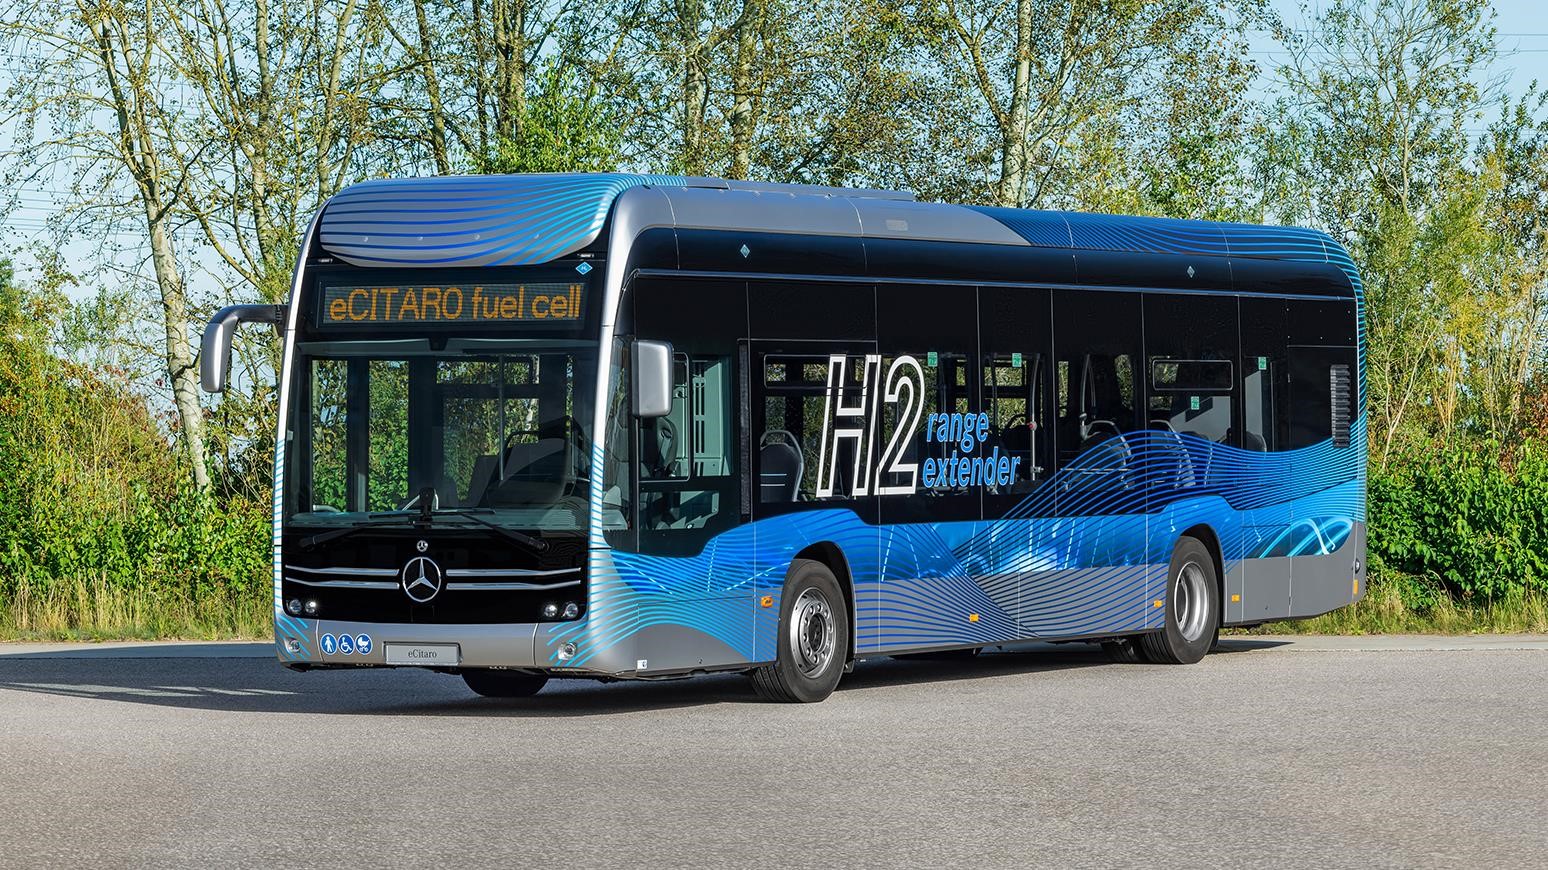 Mercedes-Benz eCitaro Fuel Cell Is ‘Bus of the Year’ & ‘Ecological Bus Of The Year’